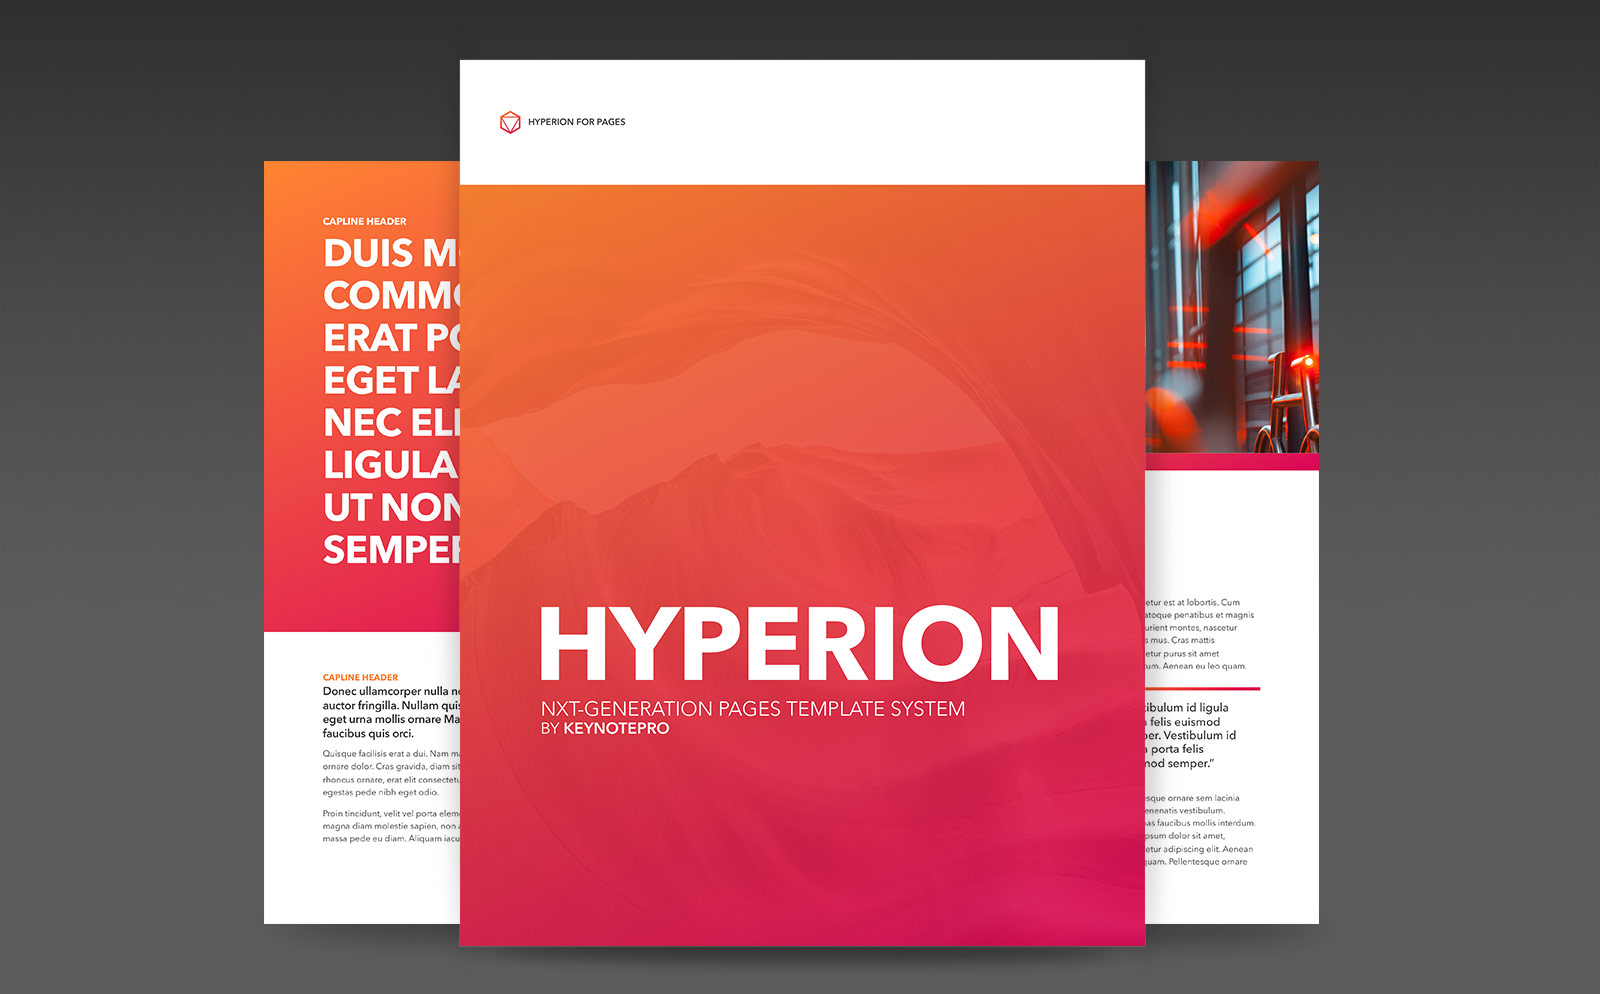 Hyperion (NXT) Template System for Pages